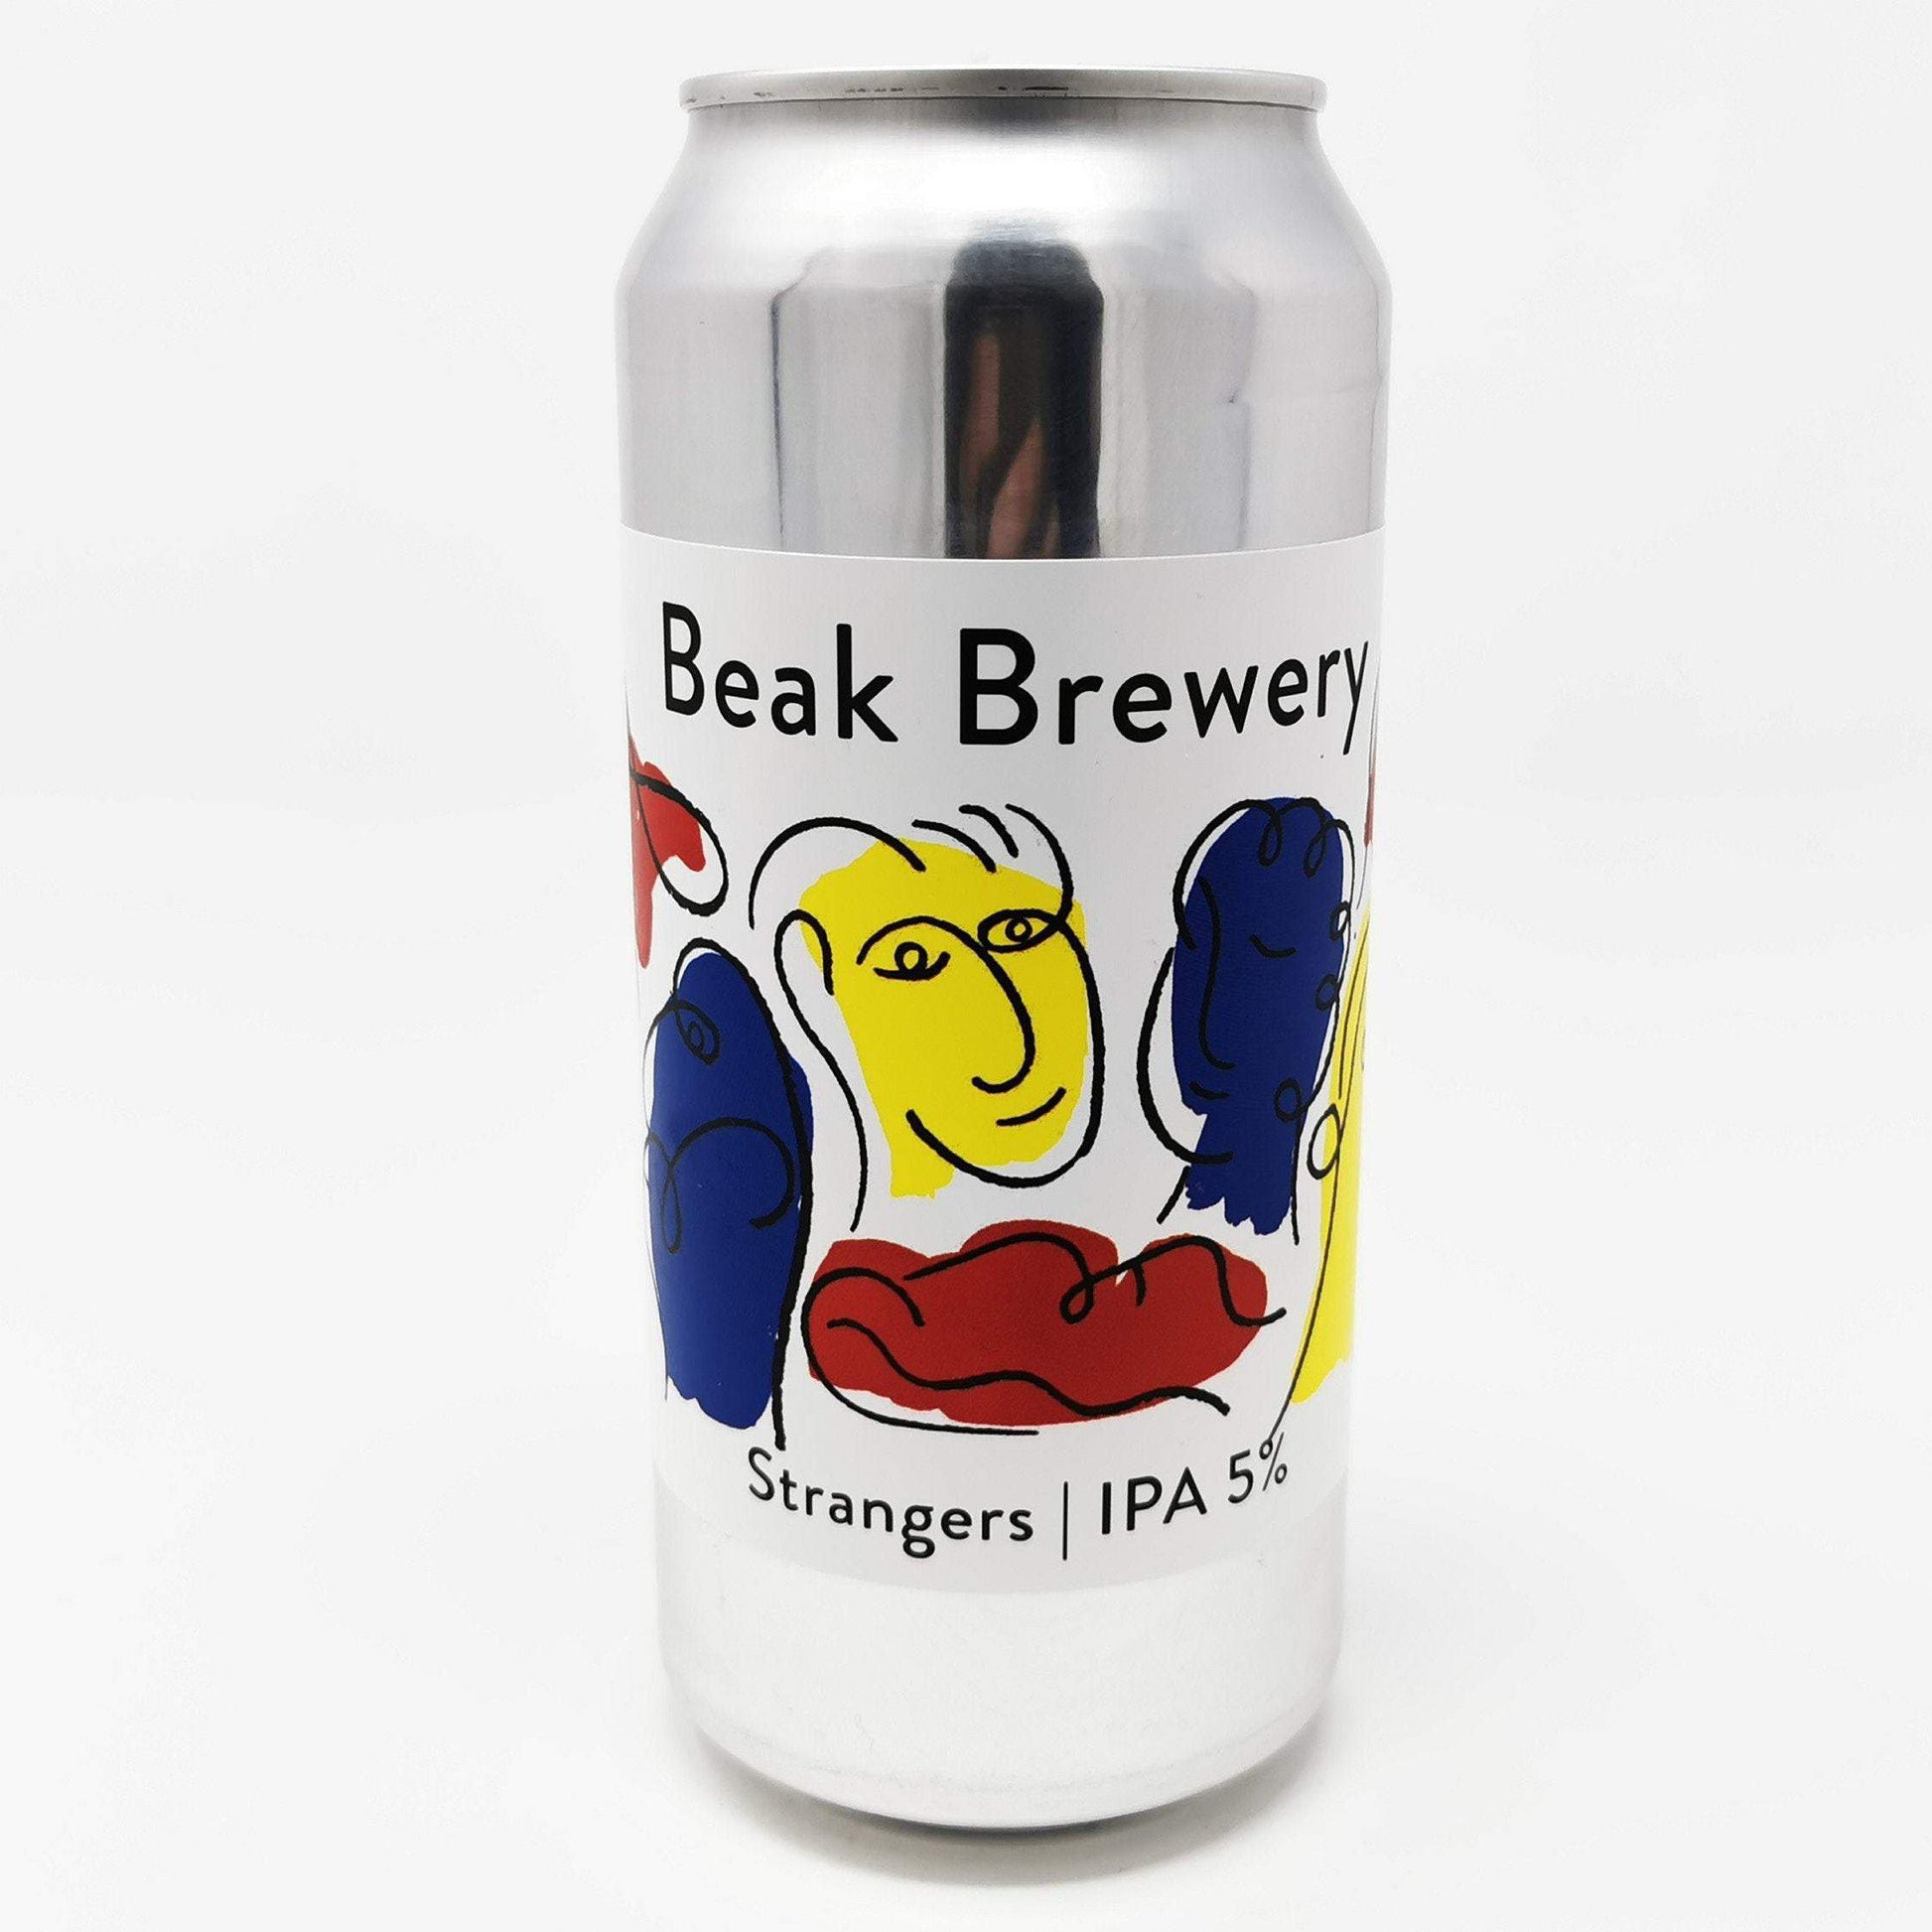 Beak Brewery Strangers Craft Beer Can Candle Beer Can Candles Adhock Homeware